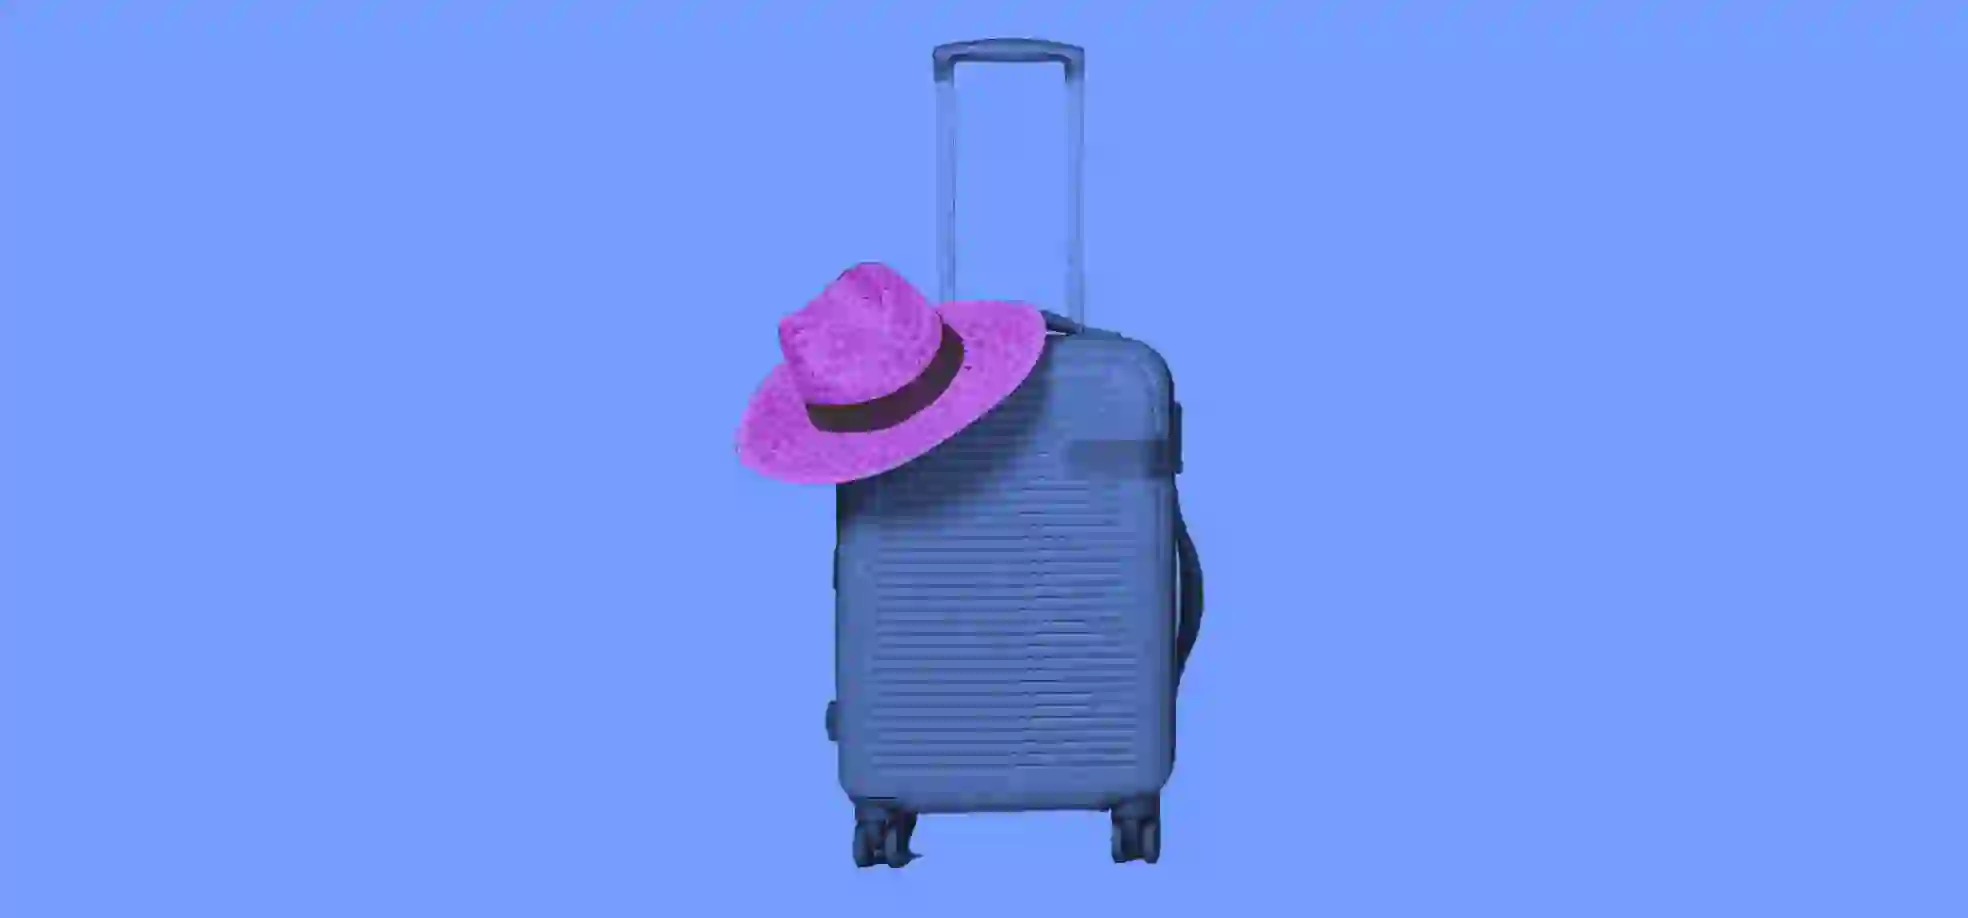 a straw hat lies on a suitcase